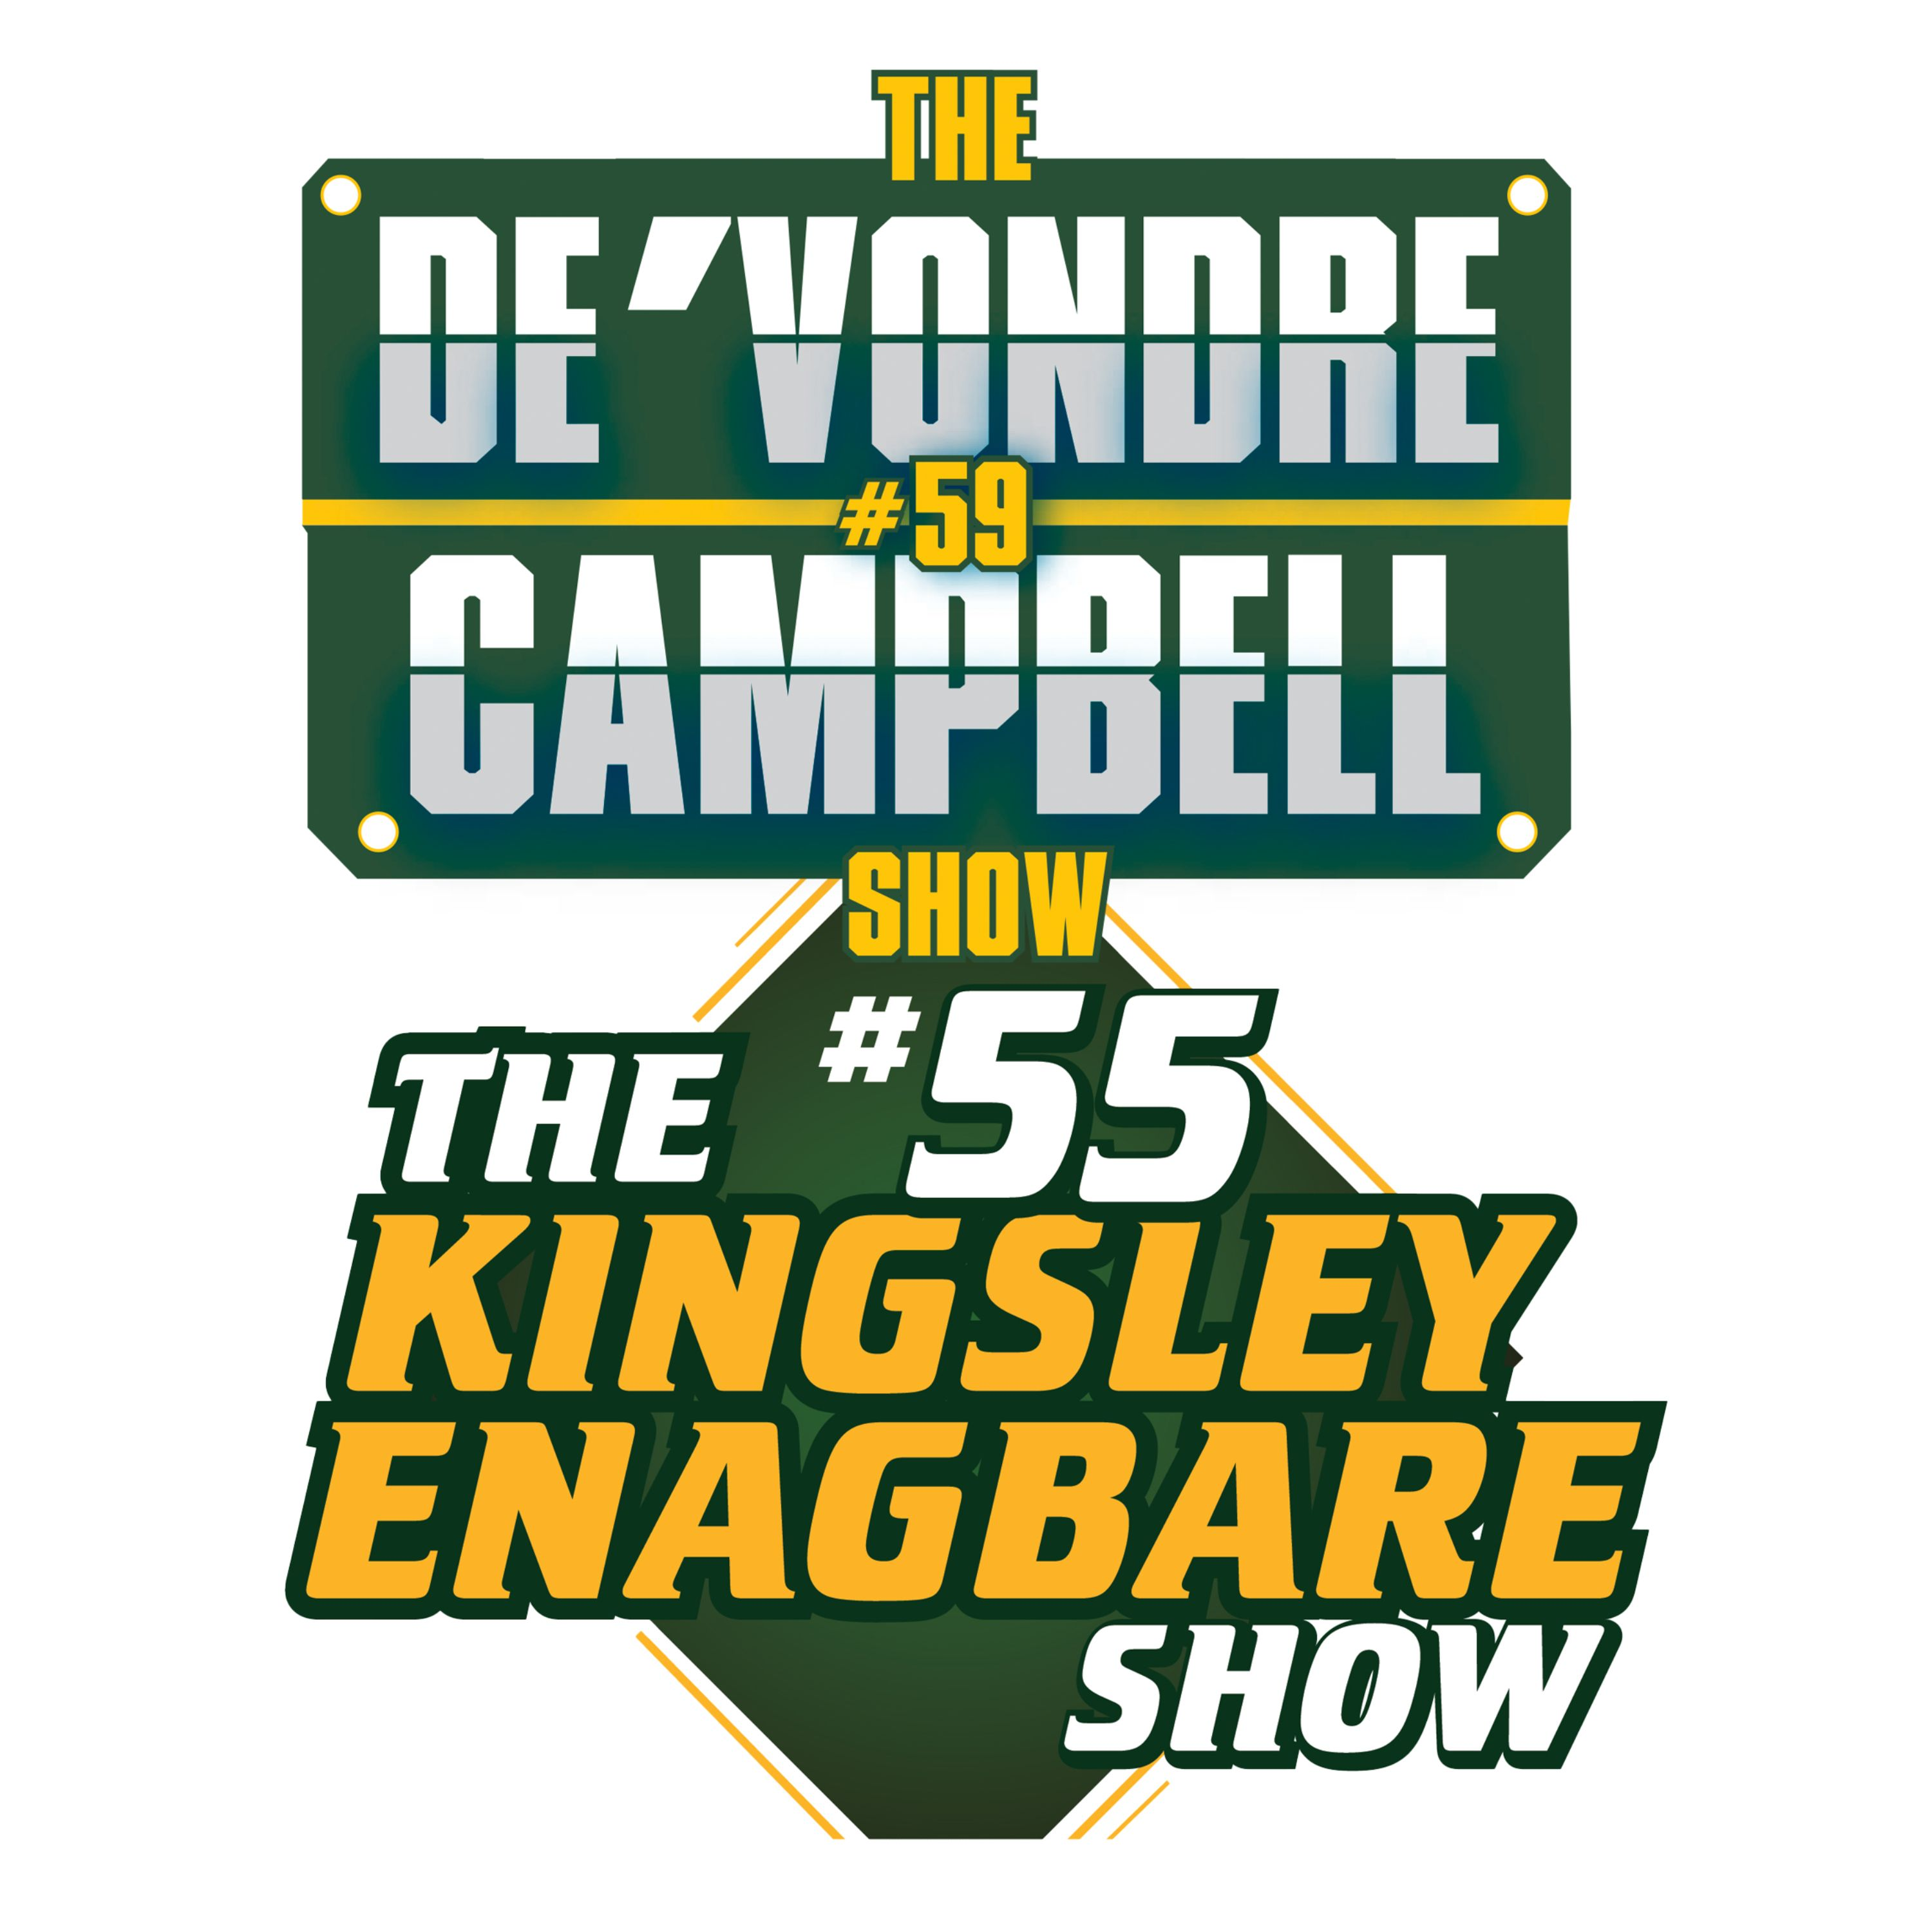 The DeVondre Campbell and Kingsley Enagbare Shows